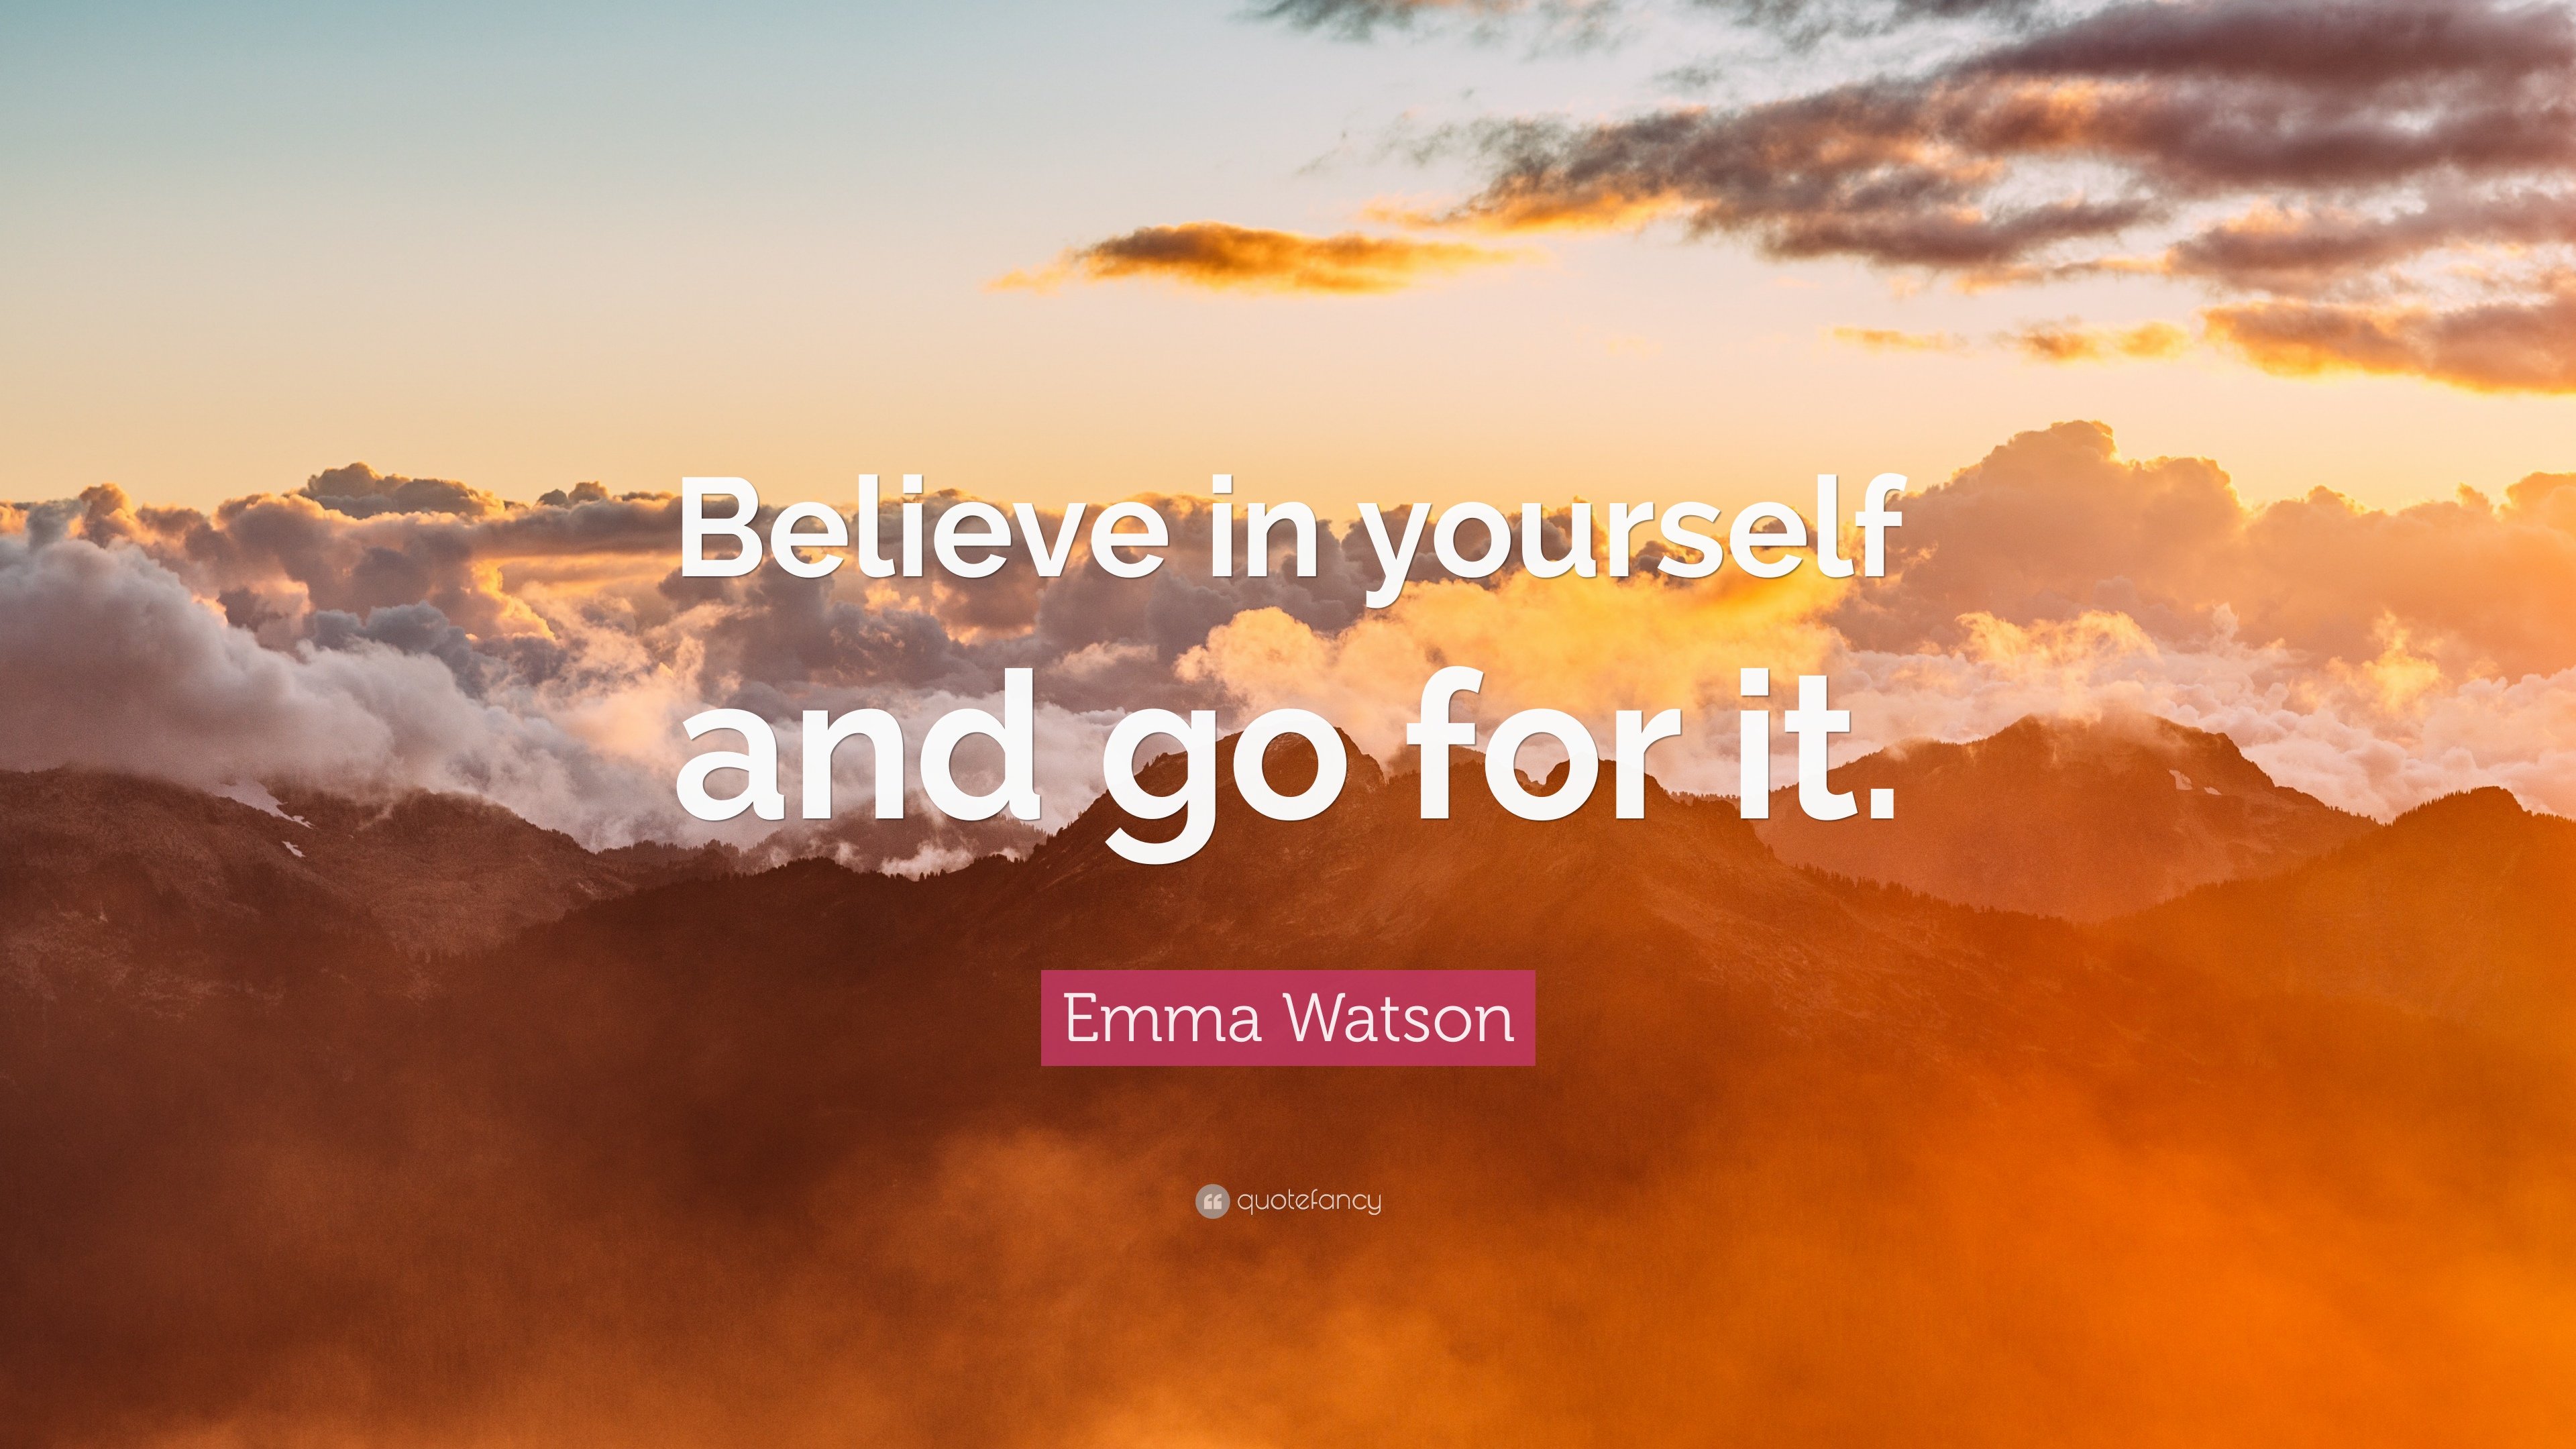 Emma Watson Quote: “Believe in yourself and go for it.” 12